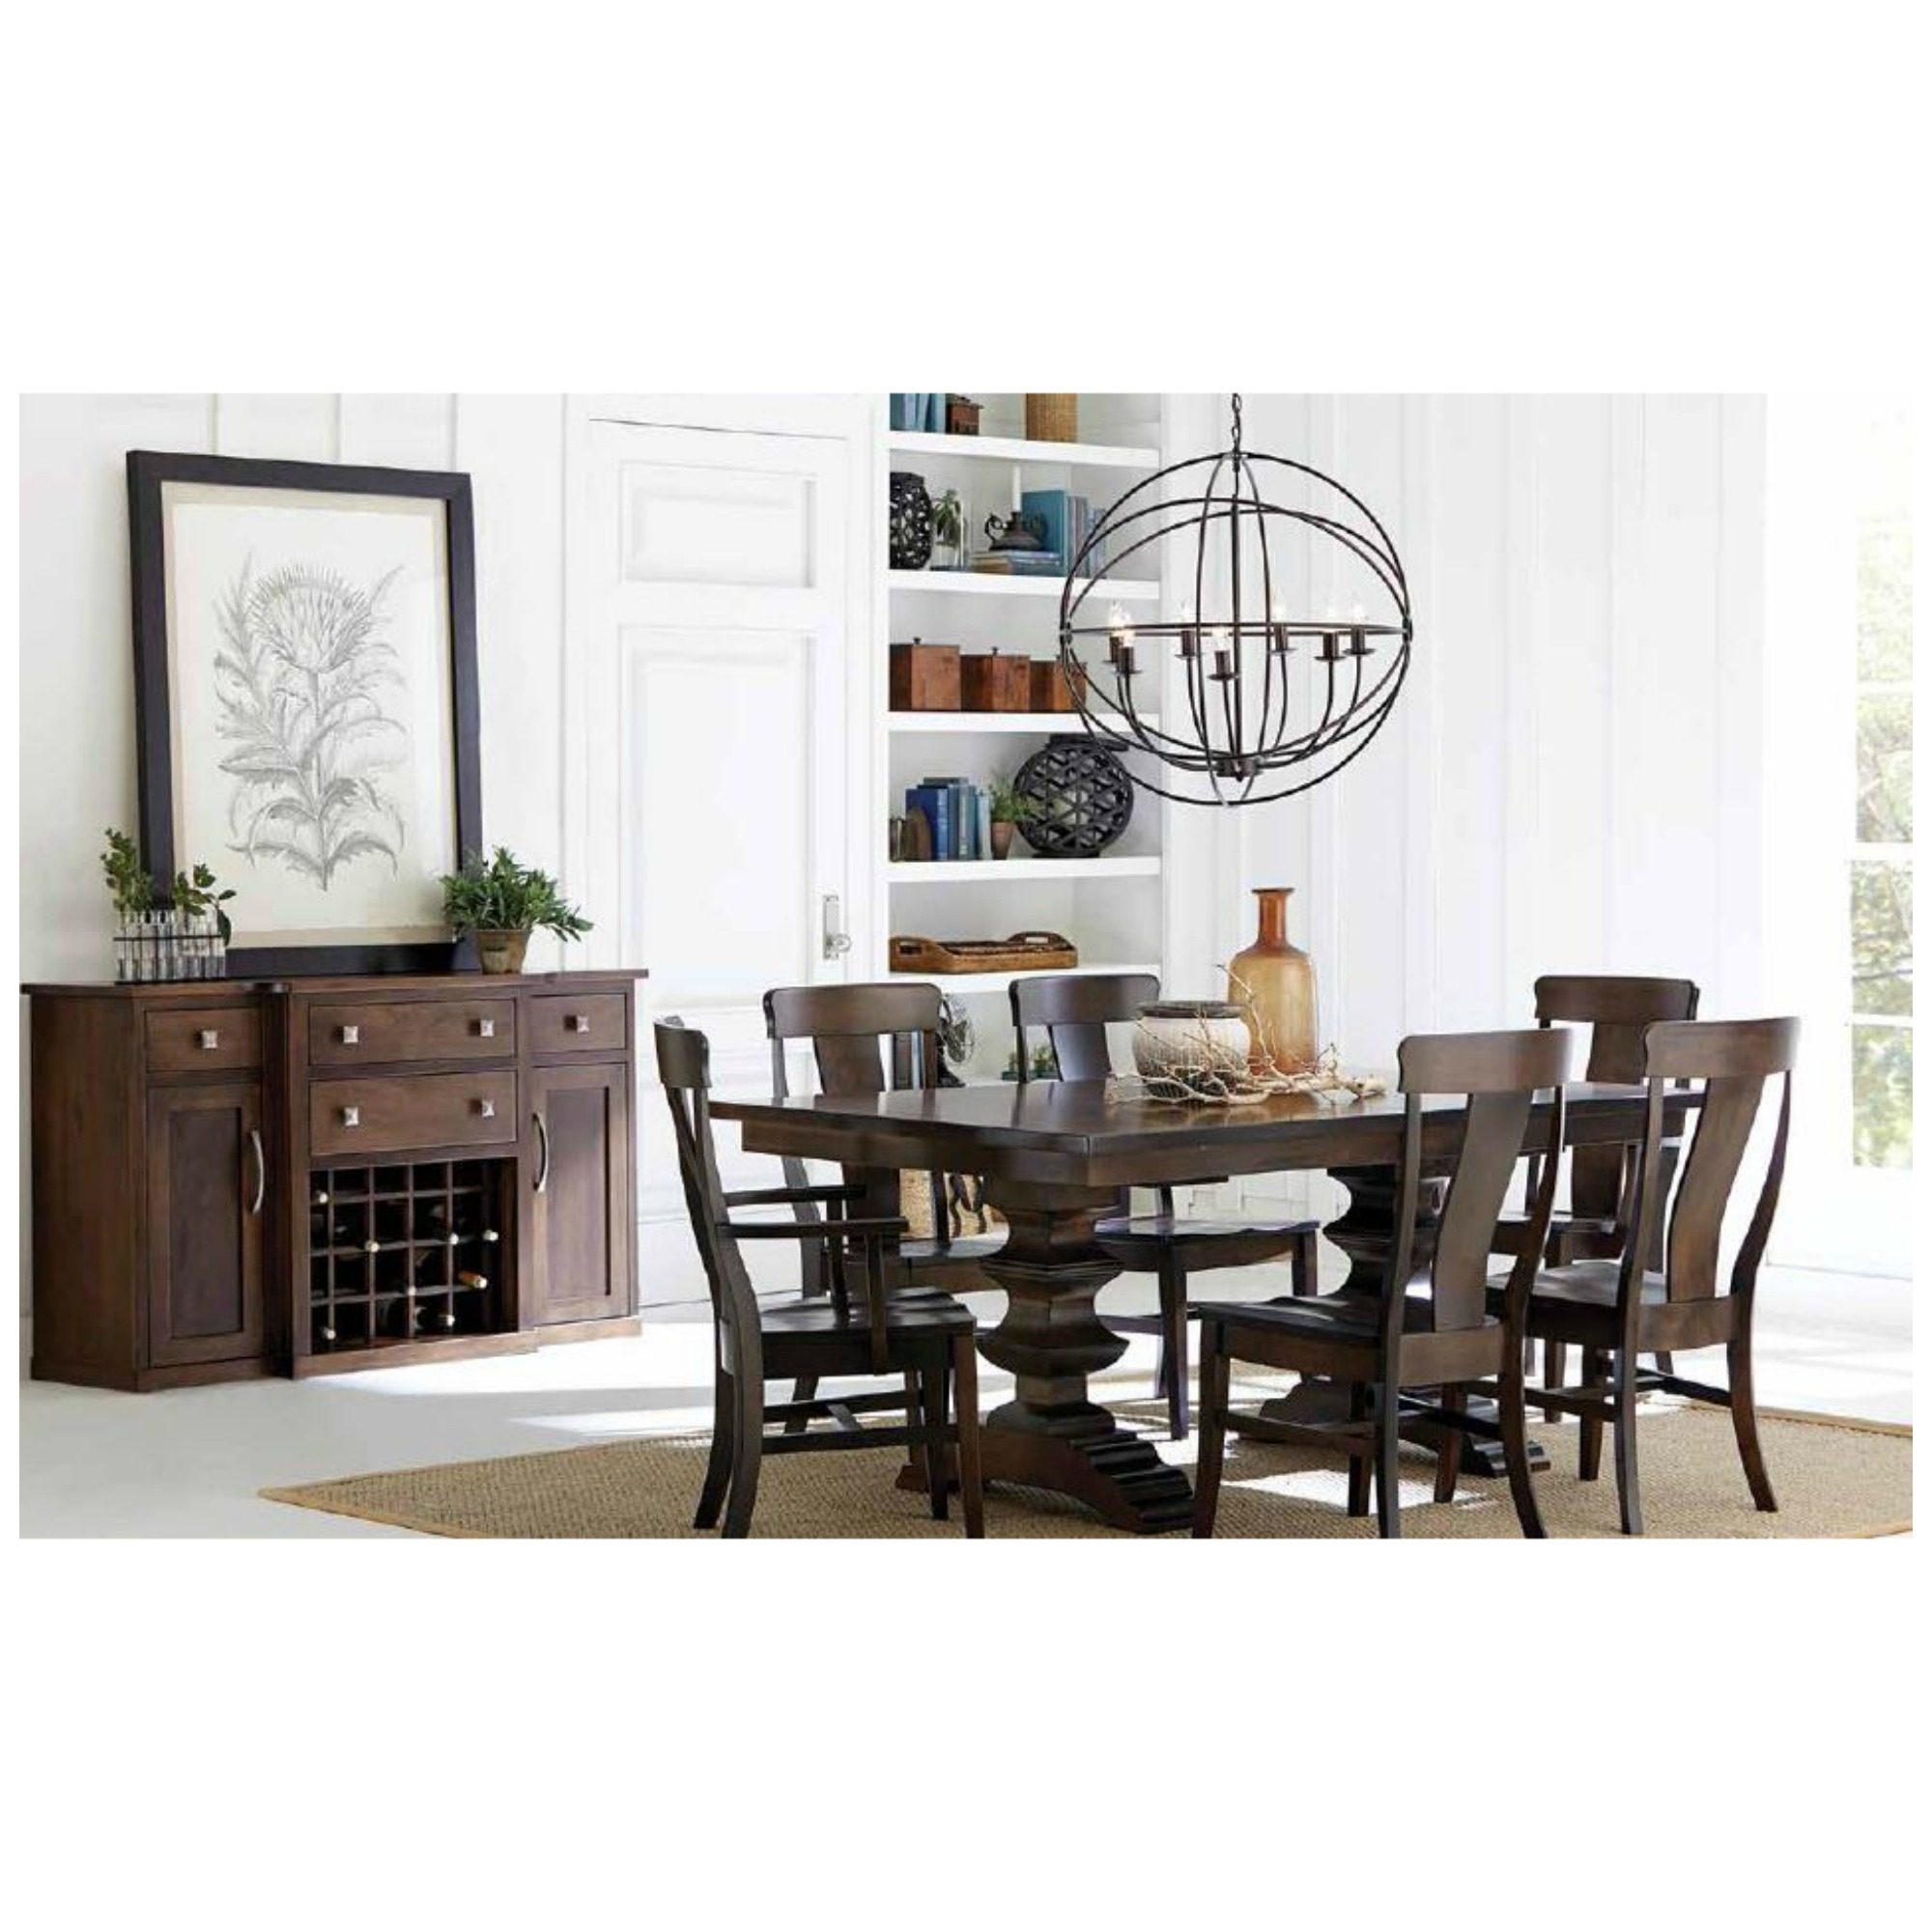 bartlett-dining-collection-amish-fusion-designs